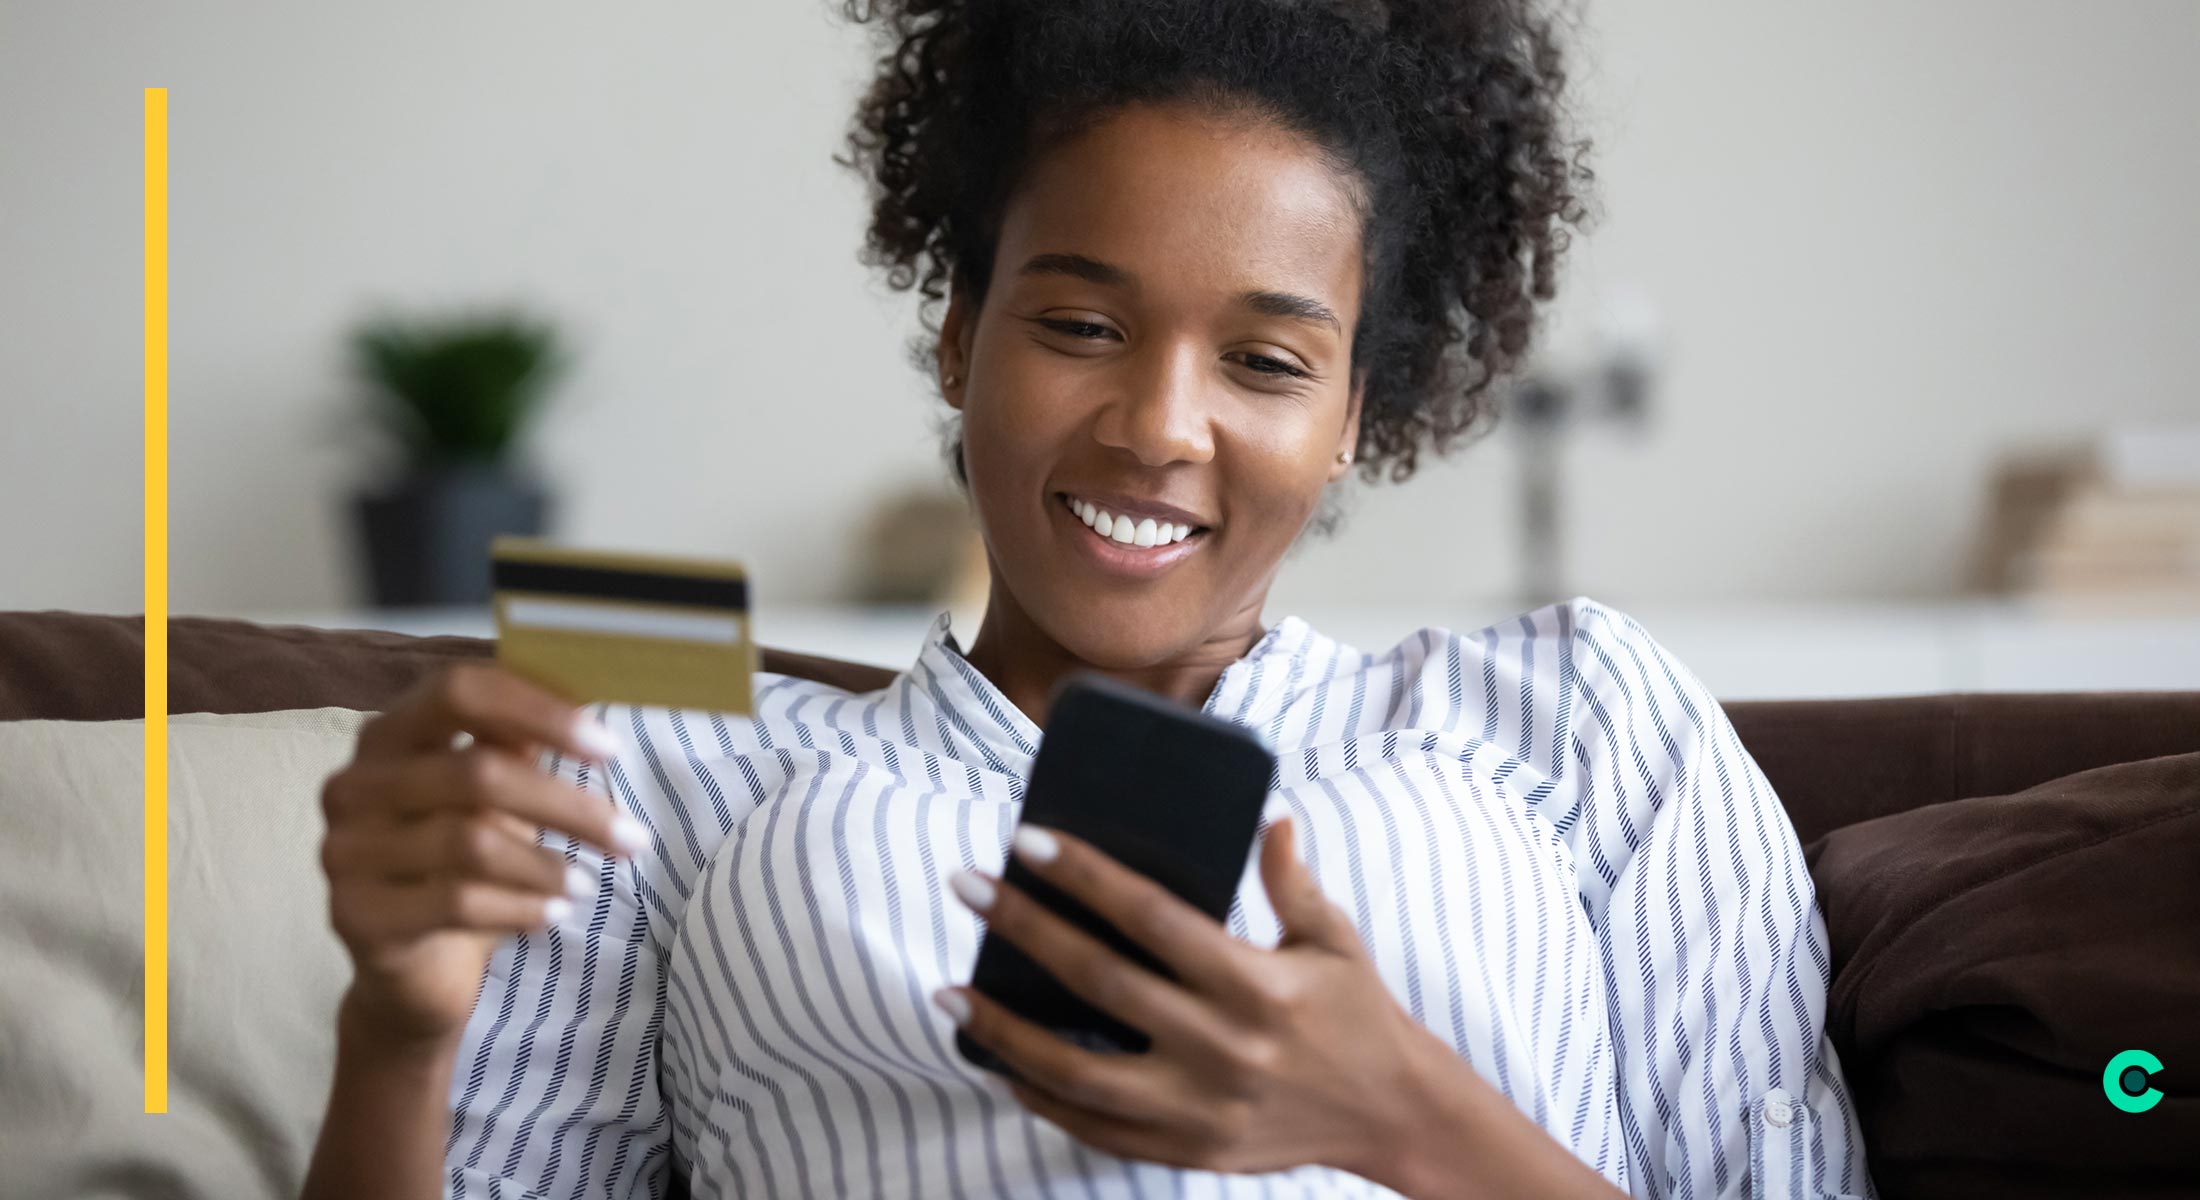 A woman holding a credit card happily pays a bill on her phone